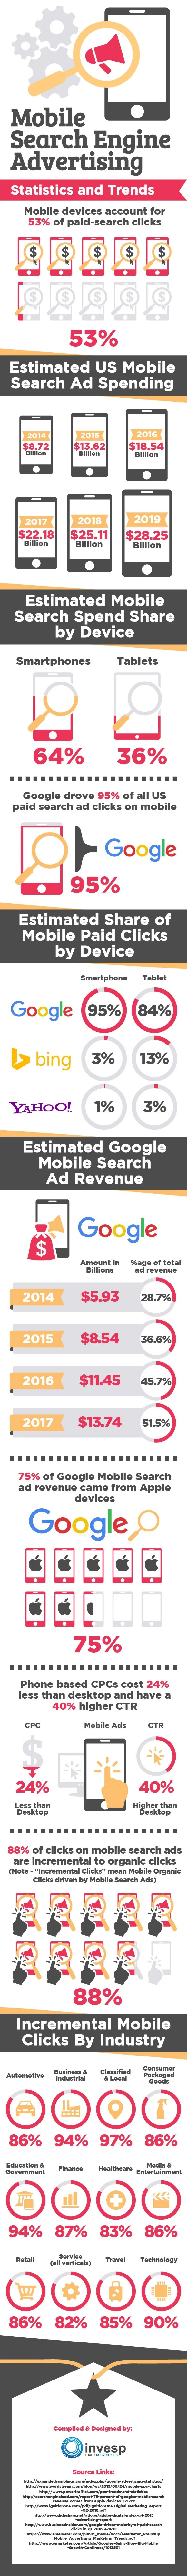 Mobile Search Engine Advertising – Statistics and Trends - #Infographic